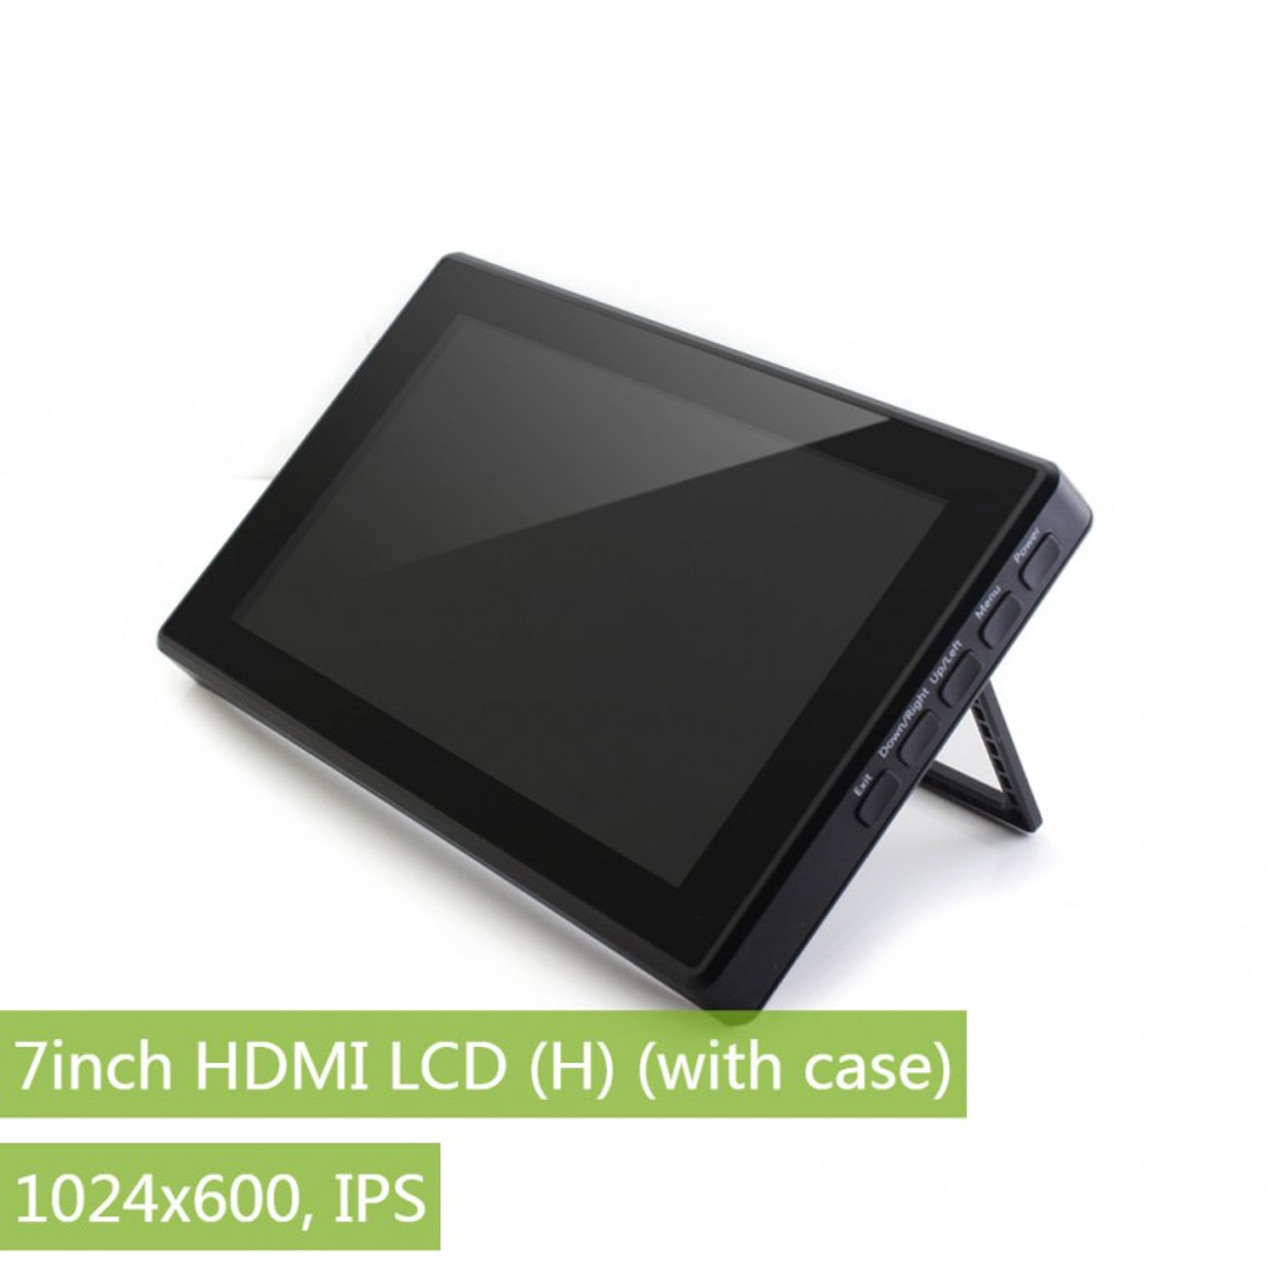 7inch HDMI LCD (H) Display (with case), 1024x600, IPS